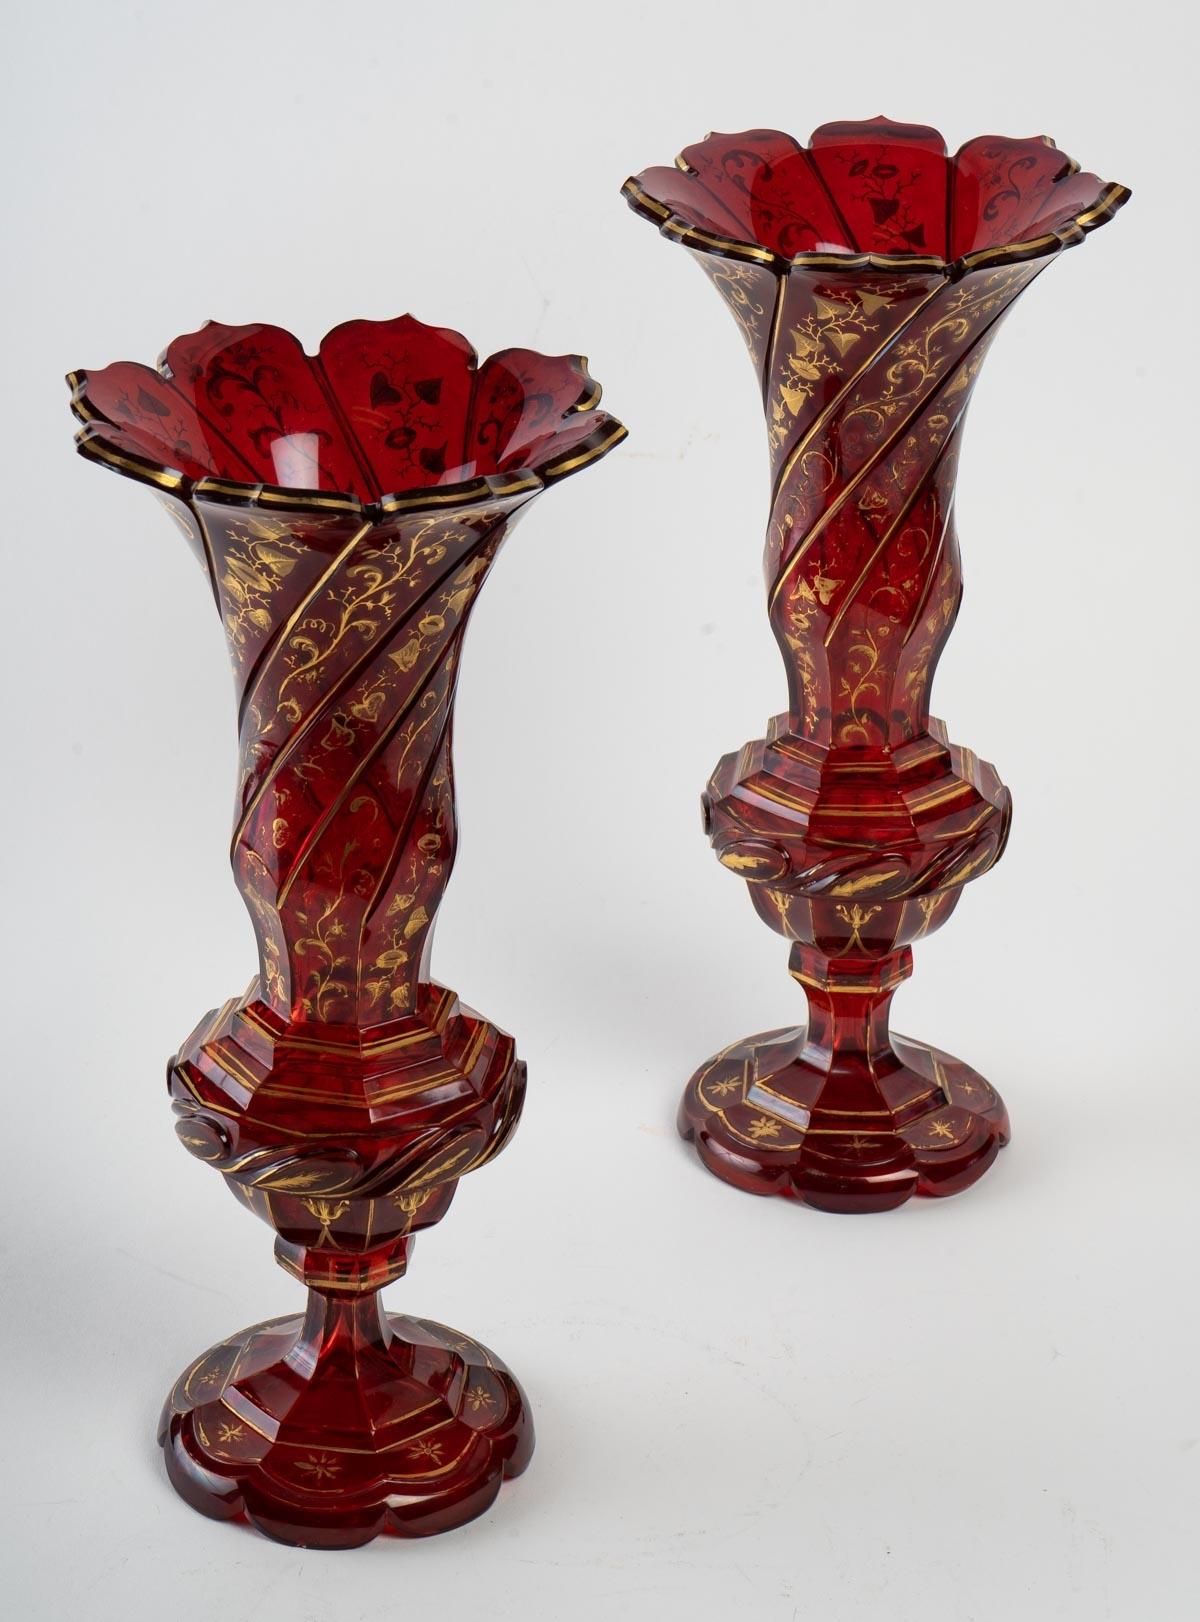 Pair of dark red Bohemian crystal vases with a gold tree leaf decoration.
Measures: H 34cm, D 16cm.